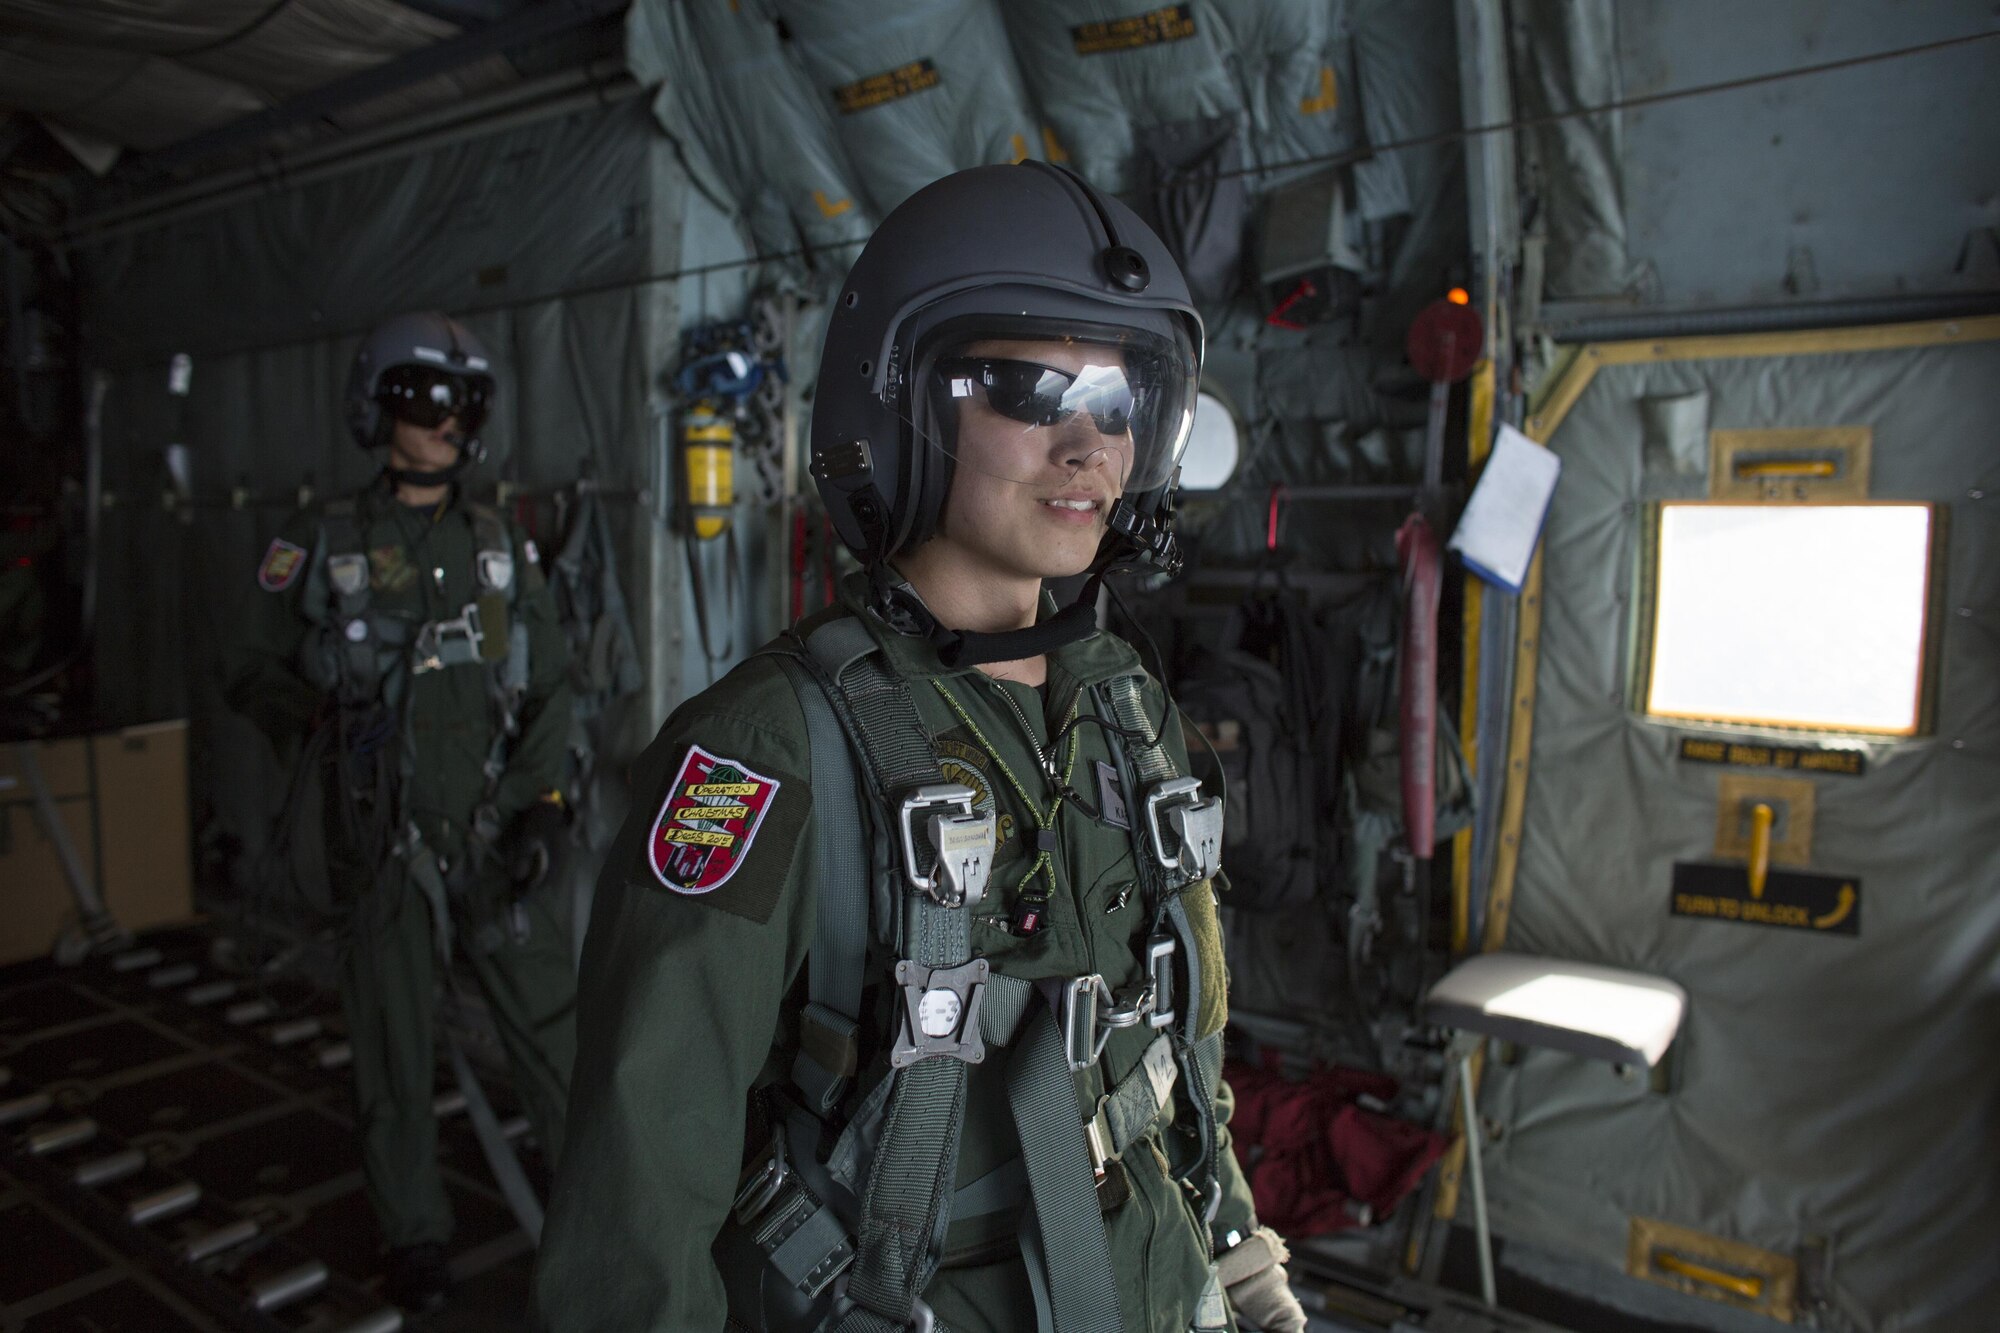 Japan Air Self-Defense Force Capt. Yusaku Kariya, 401st Squadron C-130 pilot, smiles after a successful airdrop missions over Lukunor Atoll, Federated States of Micronesia, Dec. 9, 2015, during Operation Christmas Drop. This year marks the 64th year of Operation Christmas Drop, which began in 1952, making it the world's longest-running airdrop mission. This is the first ever trilateral training event that includes additional air support from JASDF and Royal Australian Air Force C-130 aircrews. (U.S. Air Force photo by Osakabe Yasuo/Released)